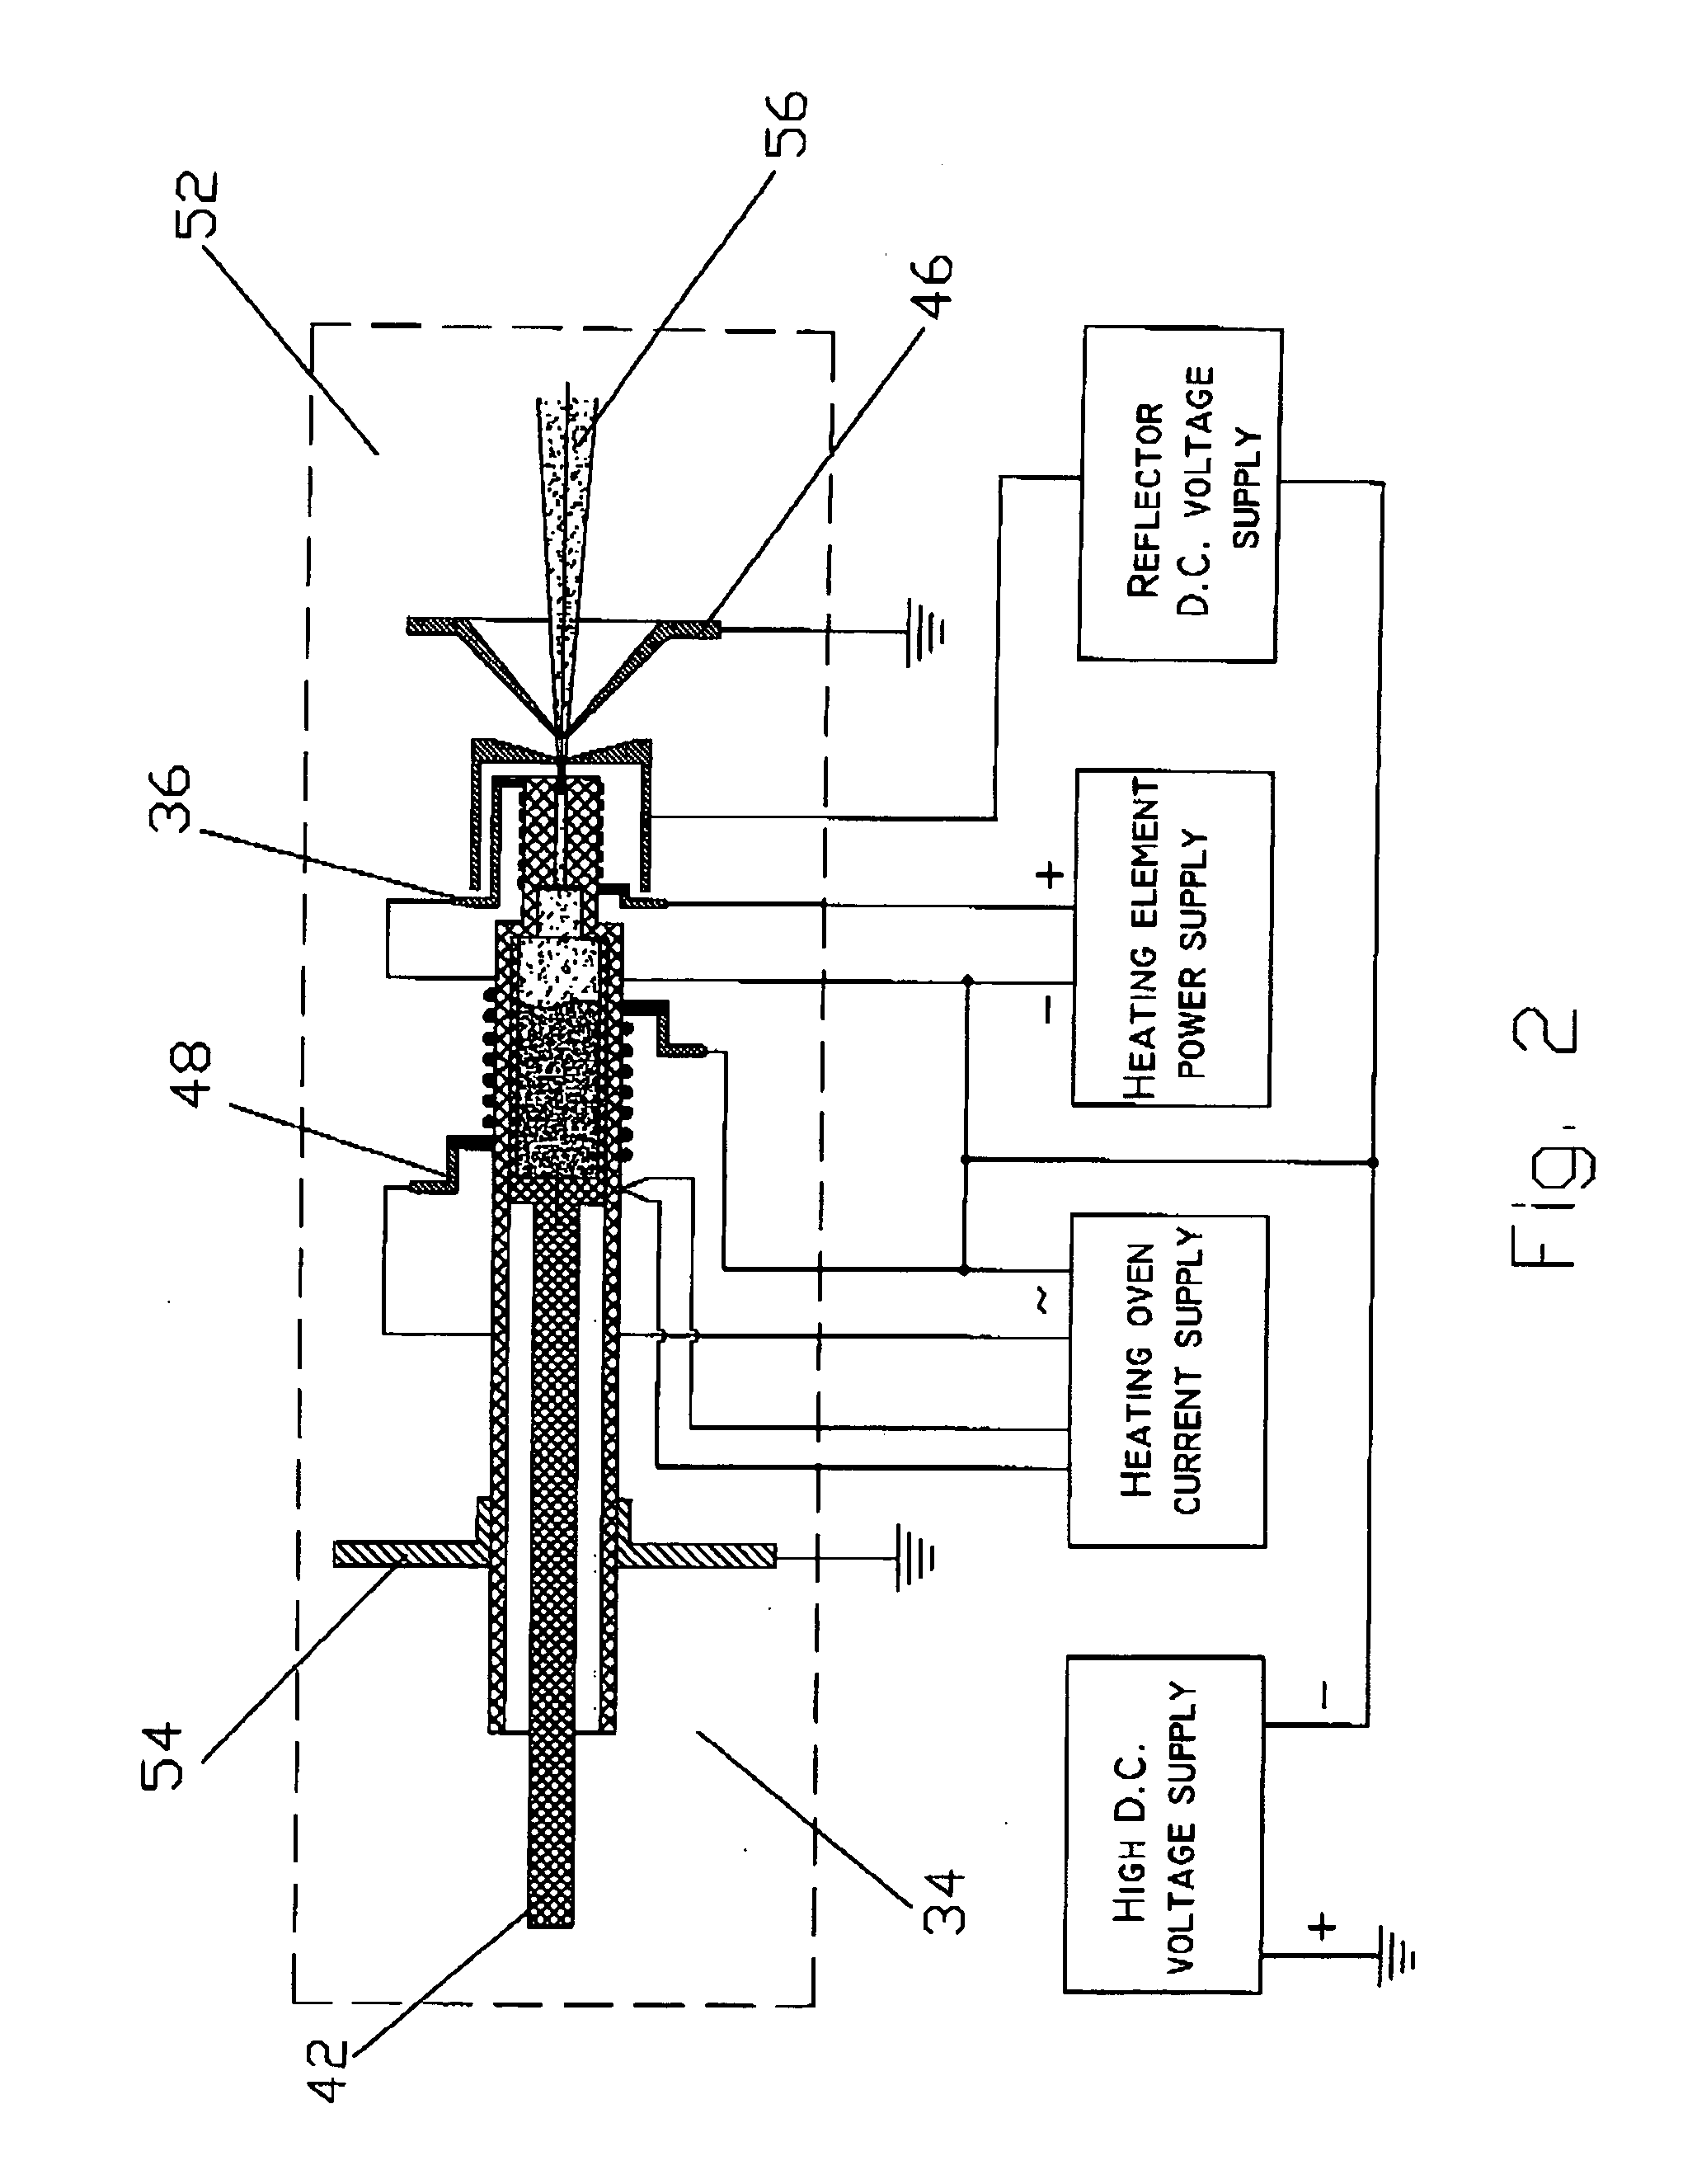 Method and apparatus for the generation of anionic and neutral particulate beams and a system using same